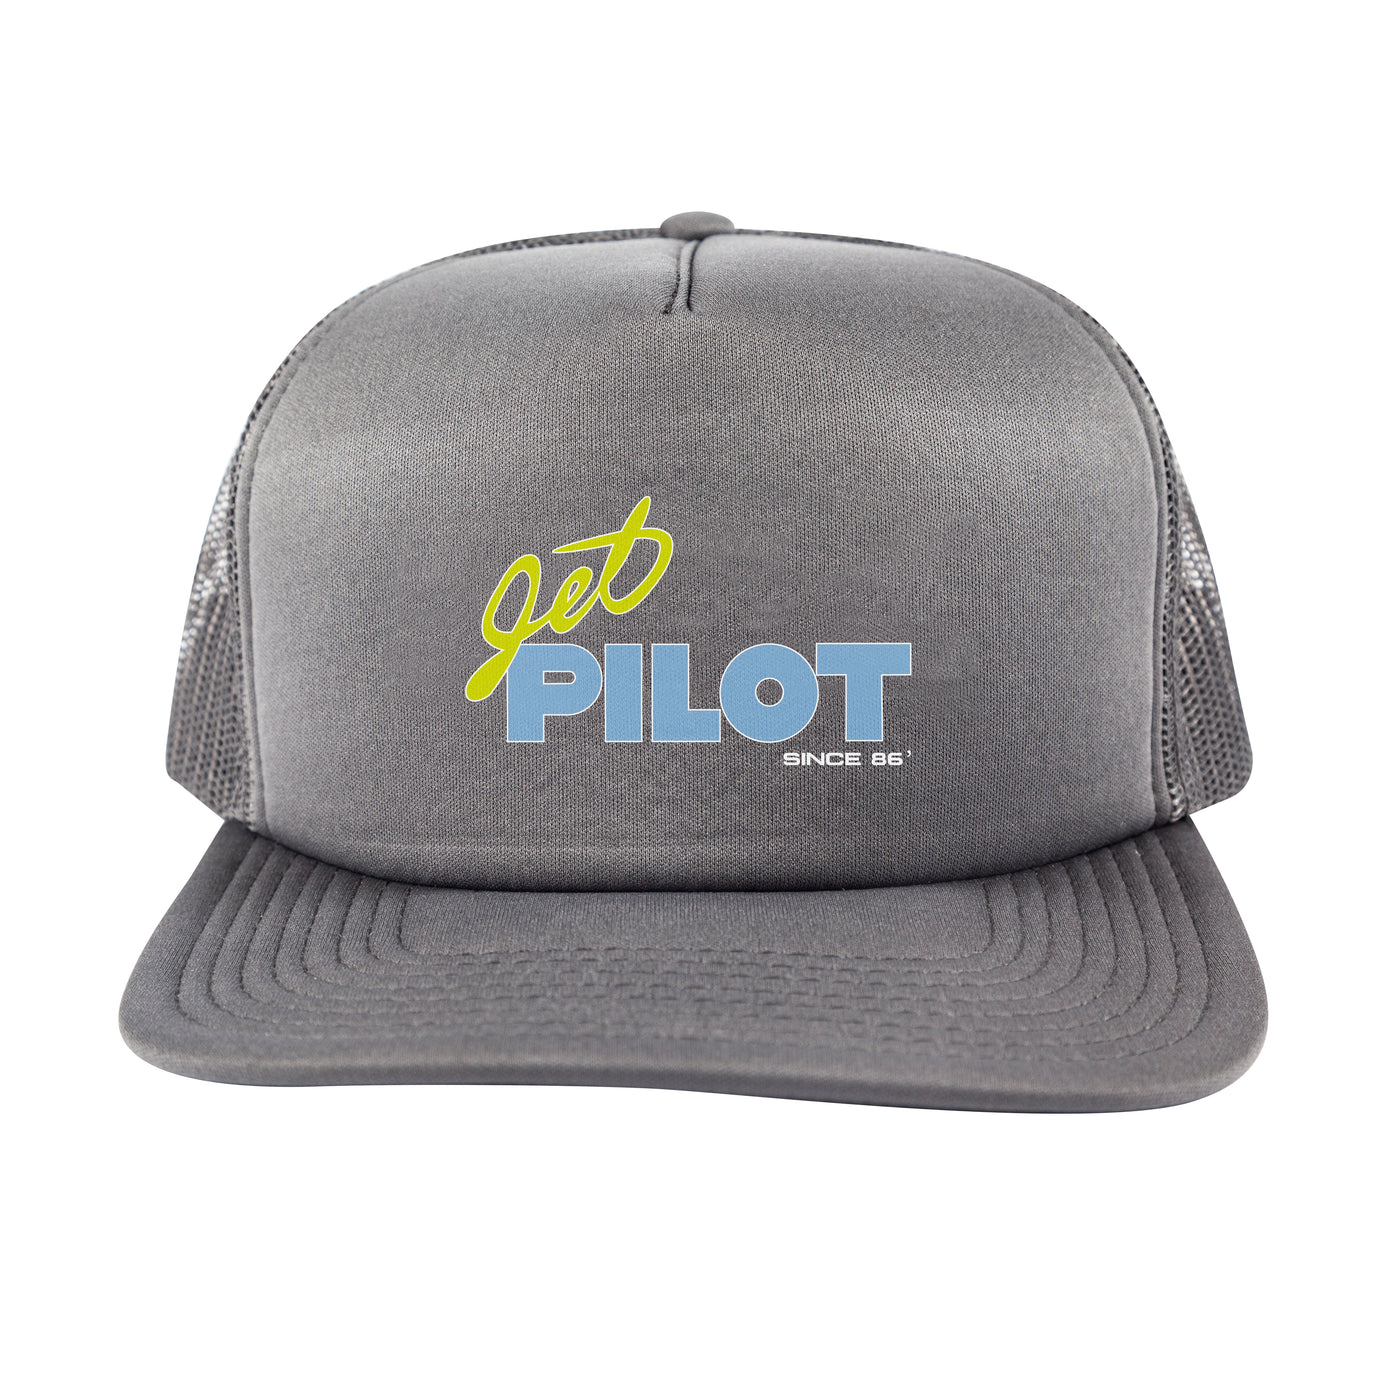 Front view of the grey vintage class hat